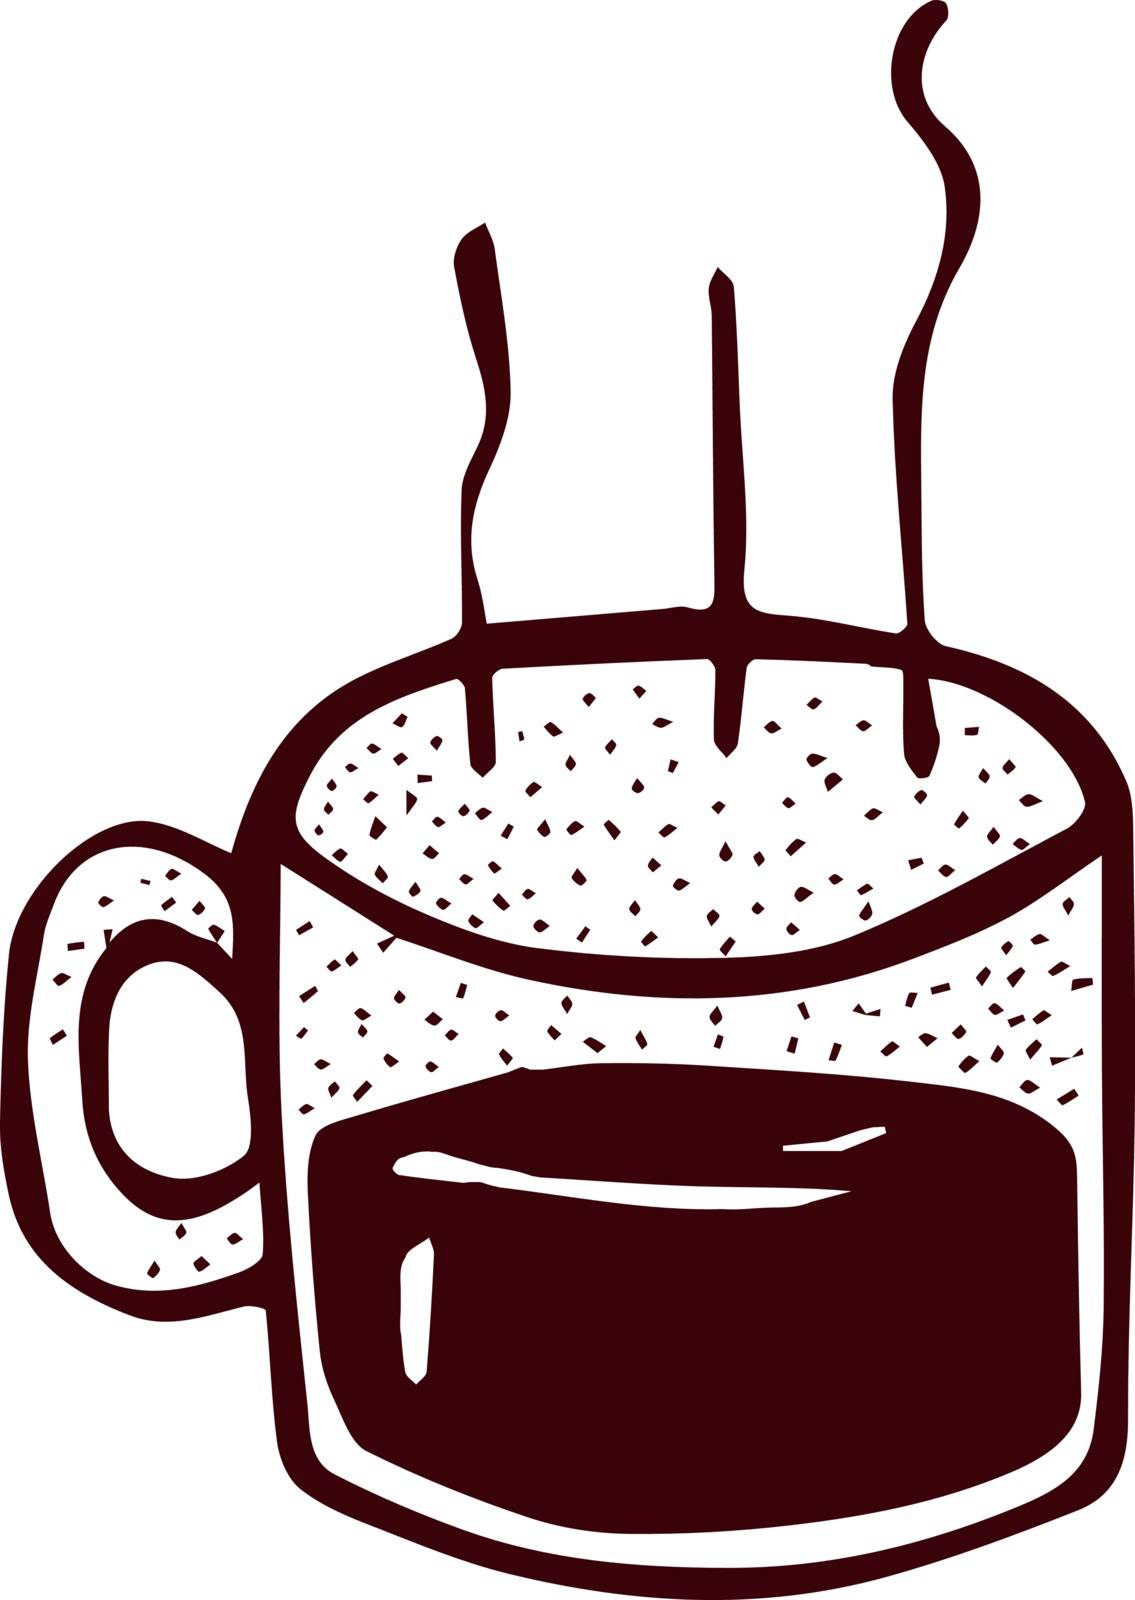 Hand drawn vector illustration or drawing of a steaming cup of coffee